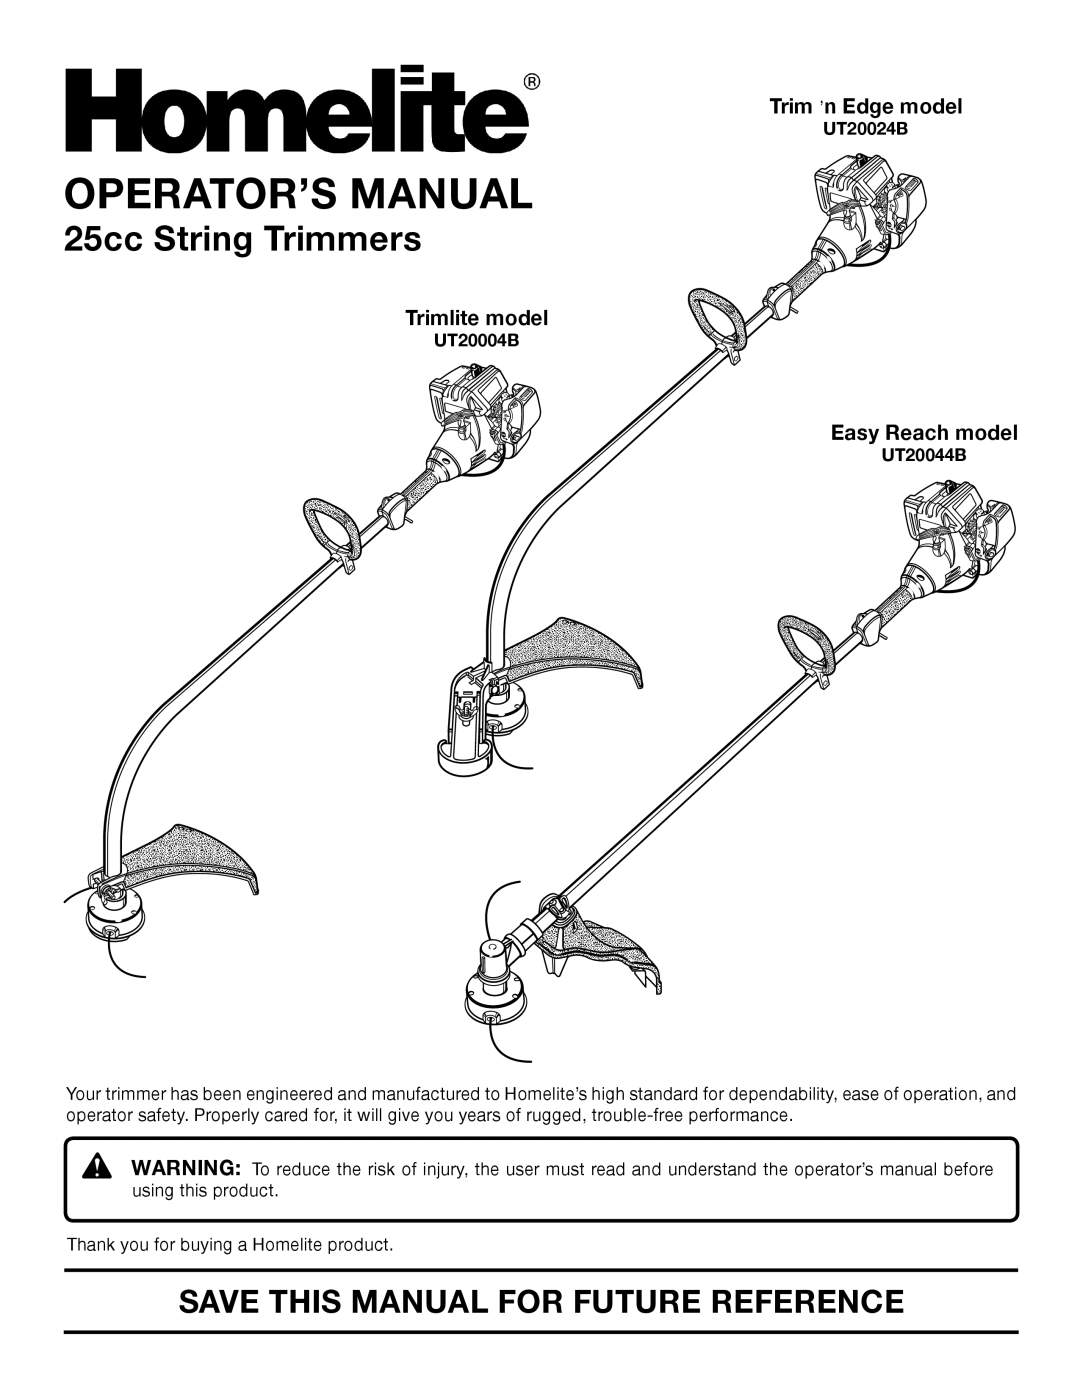 Homelite UT20024B manual Operator’S Manual, 25cc String Trimmers, Save This Manual For Future Reference, Trimlite model 